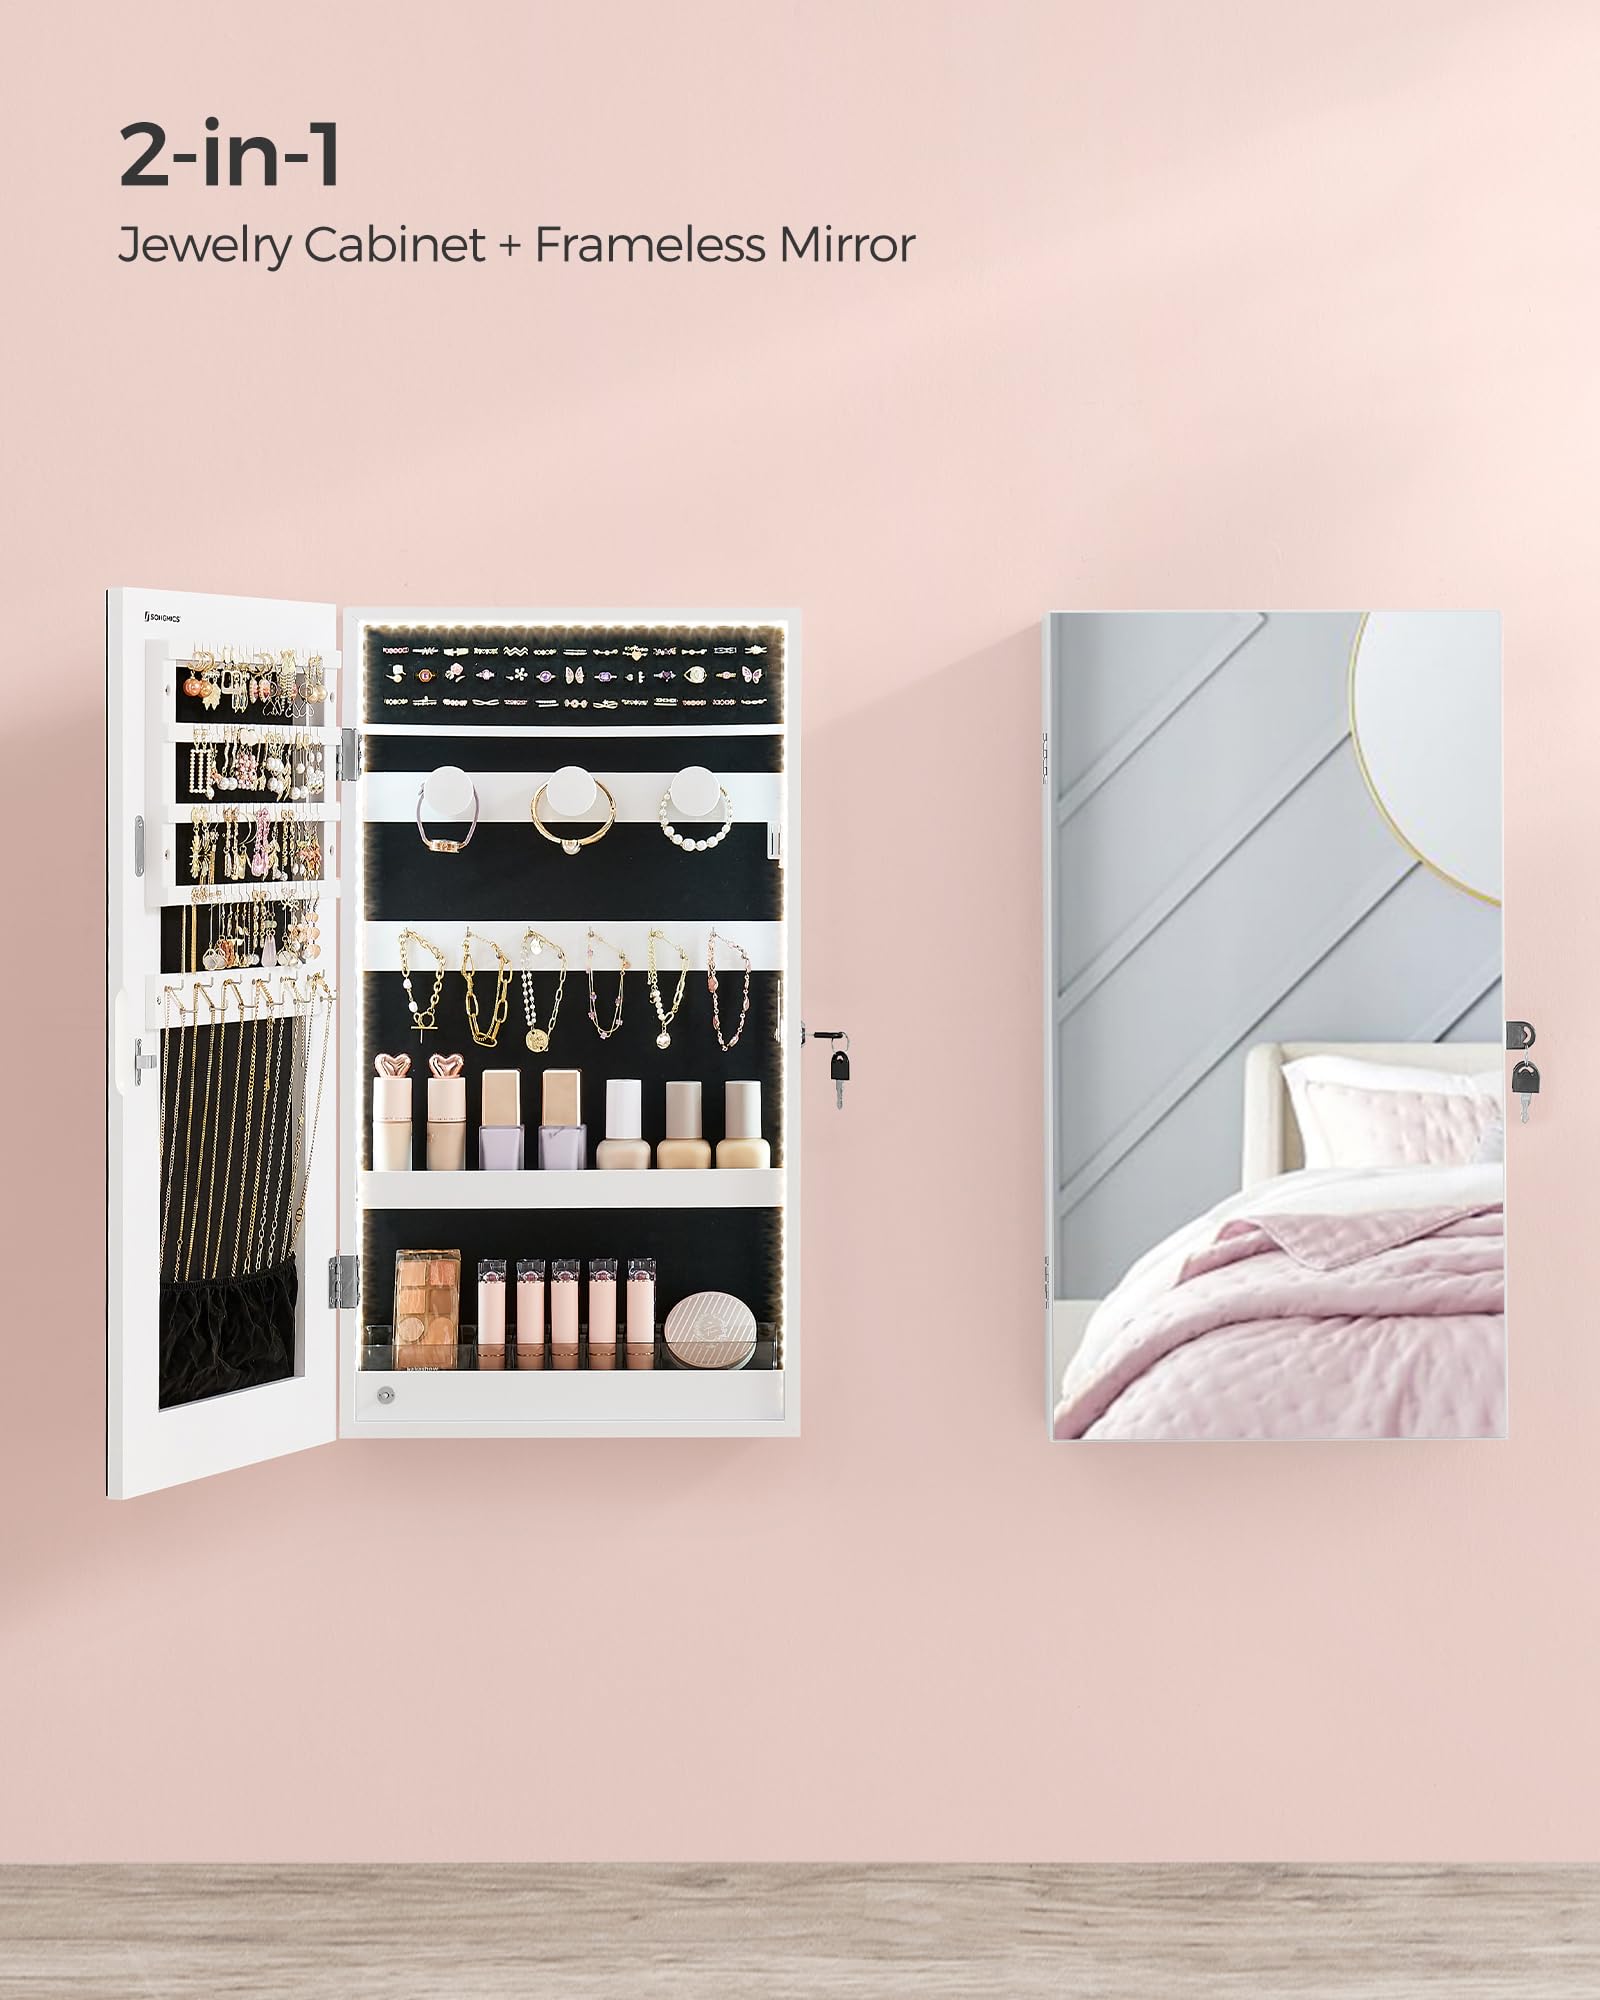 SONGMICS Mirror Jewelry Cabinet Armoire with Built-in LED Lights, Wall or Door Mounted Jewelry Storage Organizer, 3.8 x 14.6 x 26.4 Inches Hanging Mirror Cabinet, Gift Idea, White UJJC050W01